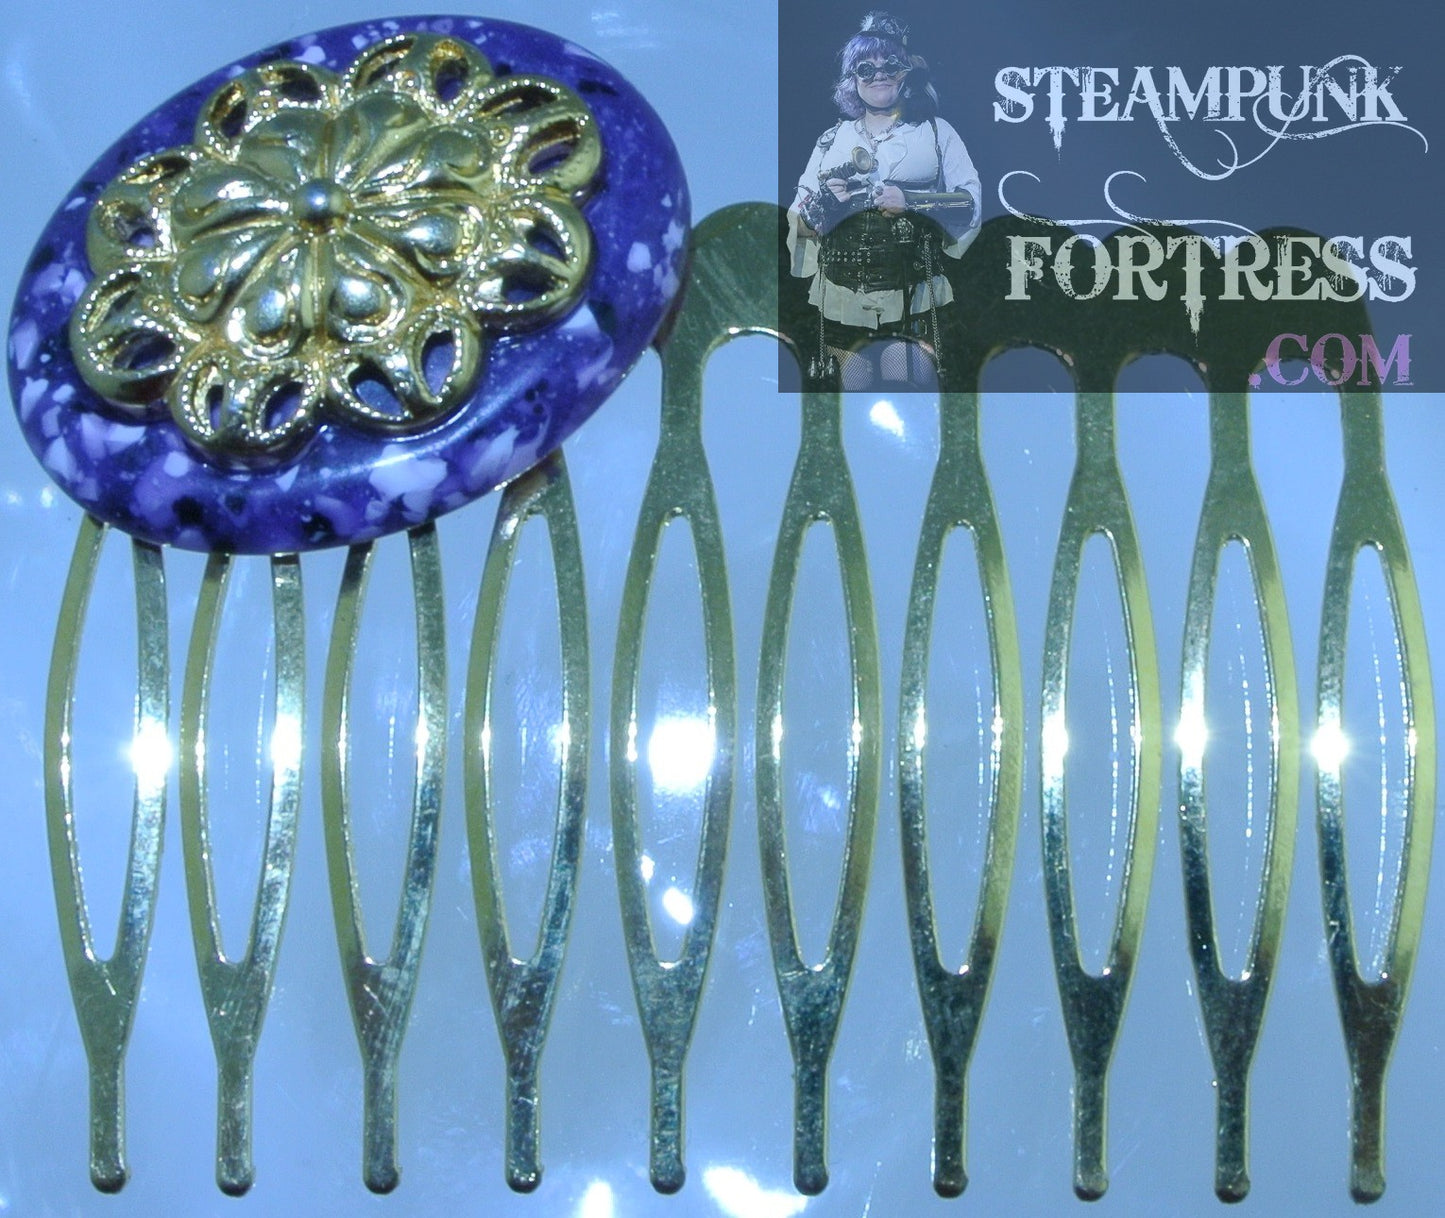 HAIR COMB GOLD PURPLE OVAL GOLD FILIGREE ACCENT STARR WILDE STEAMPUNK FORTRESS WEDDING VICTORIAN